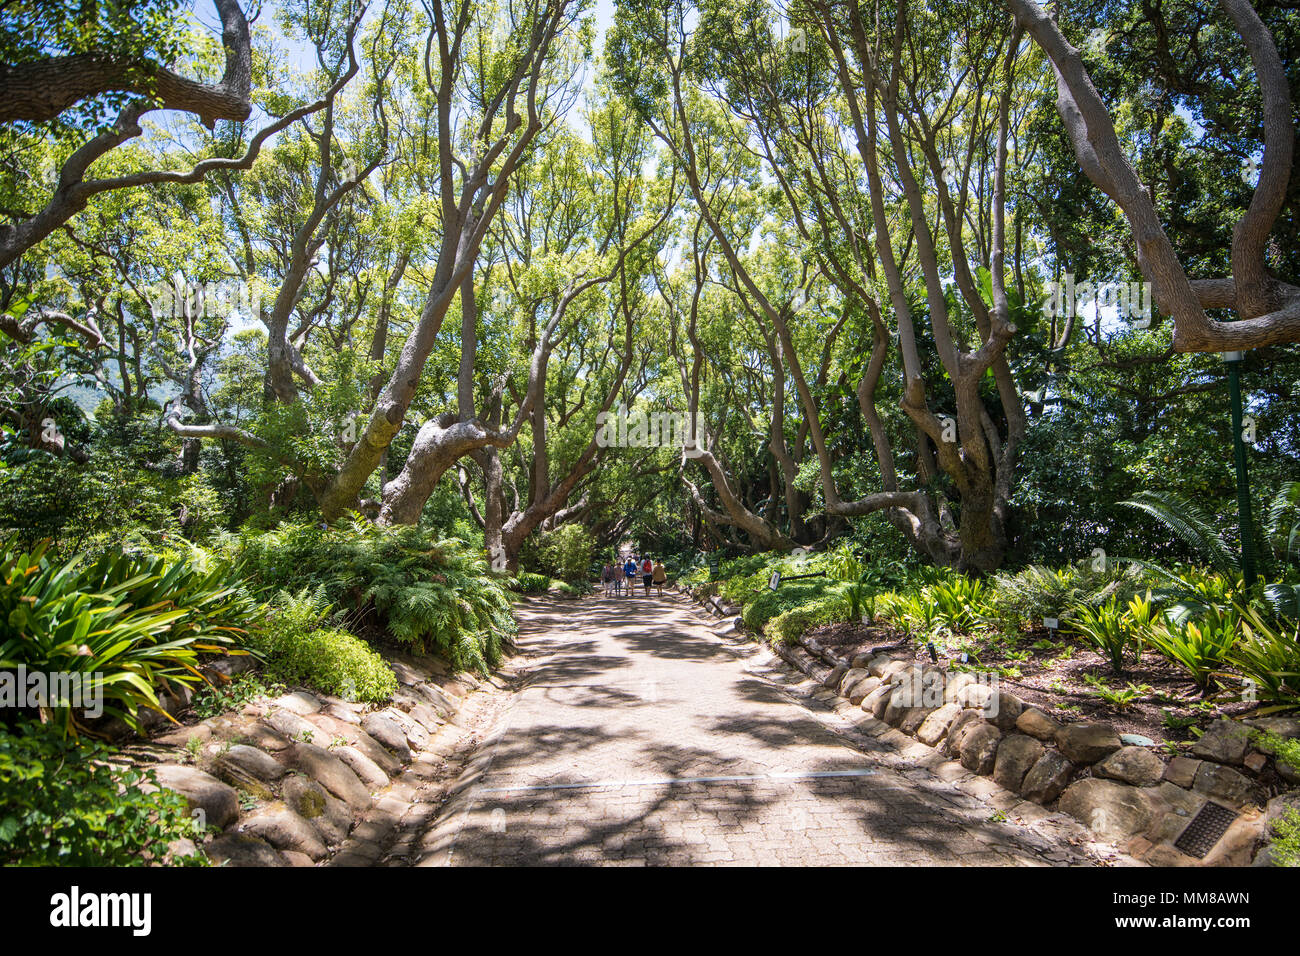 A small group of people walking along a path at the Kirstenbosch Botanical Gardens in Cape Town, South Africa Stock Photo